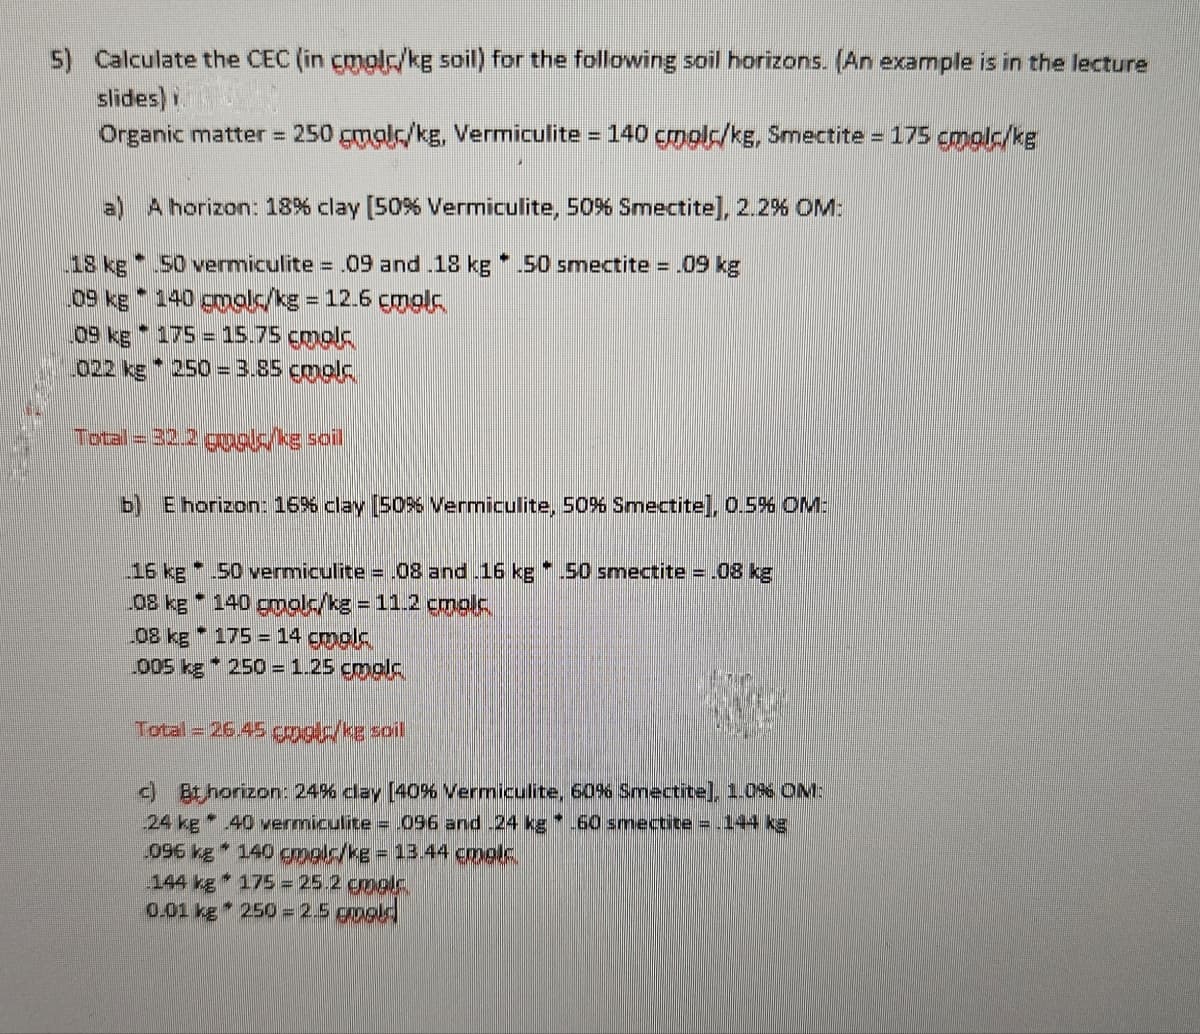 5) Calculate the CEC (in cmol/kg soil) for the following soil horizons. (An example is in the lecture
slides)
Organic matter = 250 gmol/kg, Vermiculite = 140 cmolc/kg, Smectite = 175 cmplc/kg
a)
A horizon: 18% clay [50% Vermiculite, 50% Smectite], 2.2% OM:
18 kg
09 kg
09 kg
[02 kg
M
50 vermiculite = .09 and .18 kg 50 smectite = .09 kg
140 gmolc/kg = 12.6 cmolc
175 = 15.75 cmplc
250 = 3.85 gmol.
13
Total = 32.2 goala ke soil
b) E horizon: 16% clay [50% Vermiculite, 50% Smectite], 0.5% OM:
16 kg 50 vermiculite = .08 and .16 kg * .50 smectite = .08 kg
.08 kg * 140 gmalc/kg = 11.2 cmplc.
08 kg 175 14 cmpl
005 kg 250 = 1.25 emplc
Total = 26.45 gols/kg soil
c) Bt horizon: 24% clay [40% Vermiculite, 60% Smectite], 1.0% OM:
24 kg 40 vermiculite = .096 and -24 kg -60 smectite = .144 kg
4
096 kg 140 gmol/kg = 13.44 cmolc.
144 kg 175 = 25.2 emalc
0.01 kg * 250 = 2.5 goold